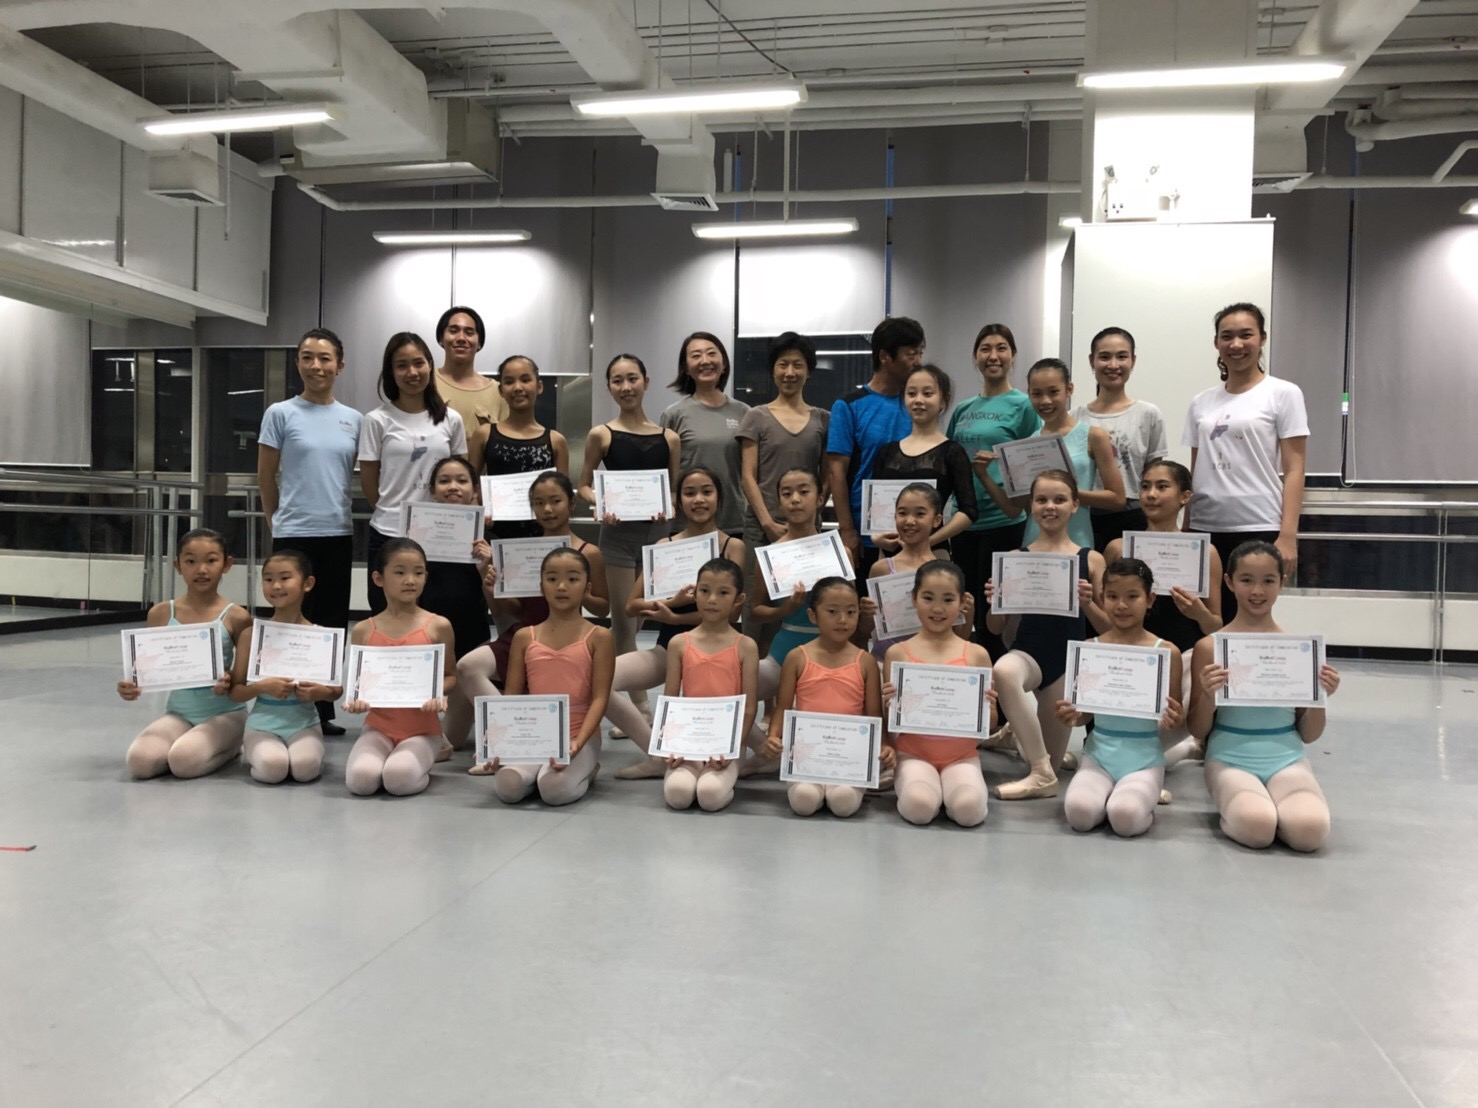 Ballet Camp Thailand 2018 was successfully done ❤ 